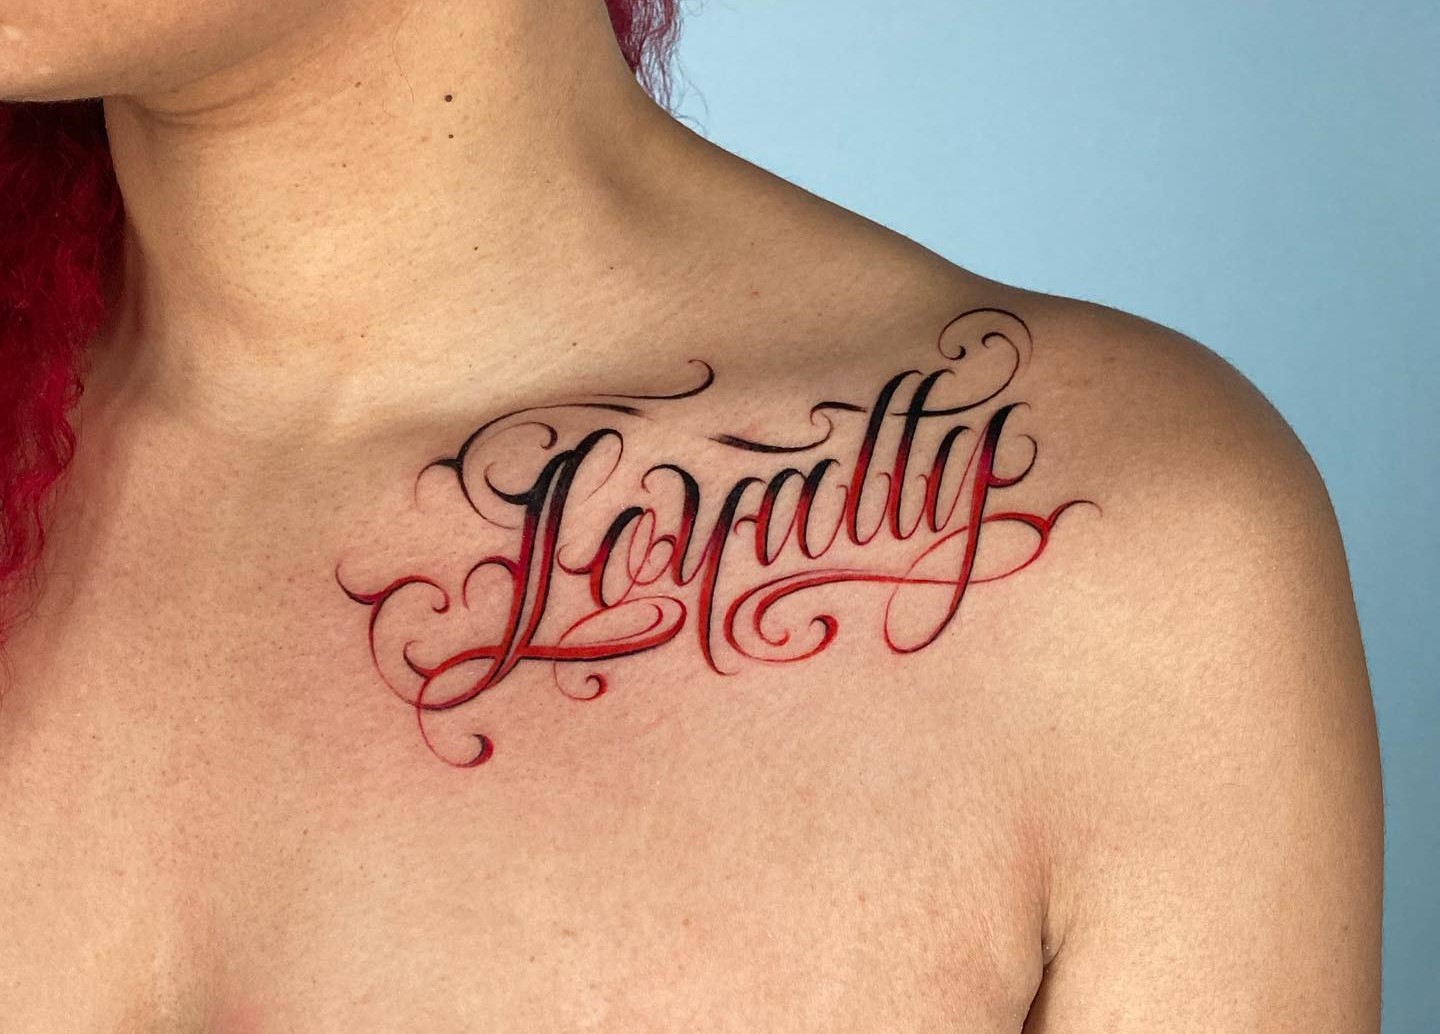 Top 24 Loyalty Tattoo Ideas Tattoos for Loyalty Meanings and Designs   Tattoolicom